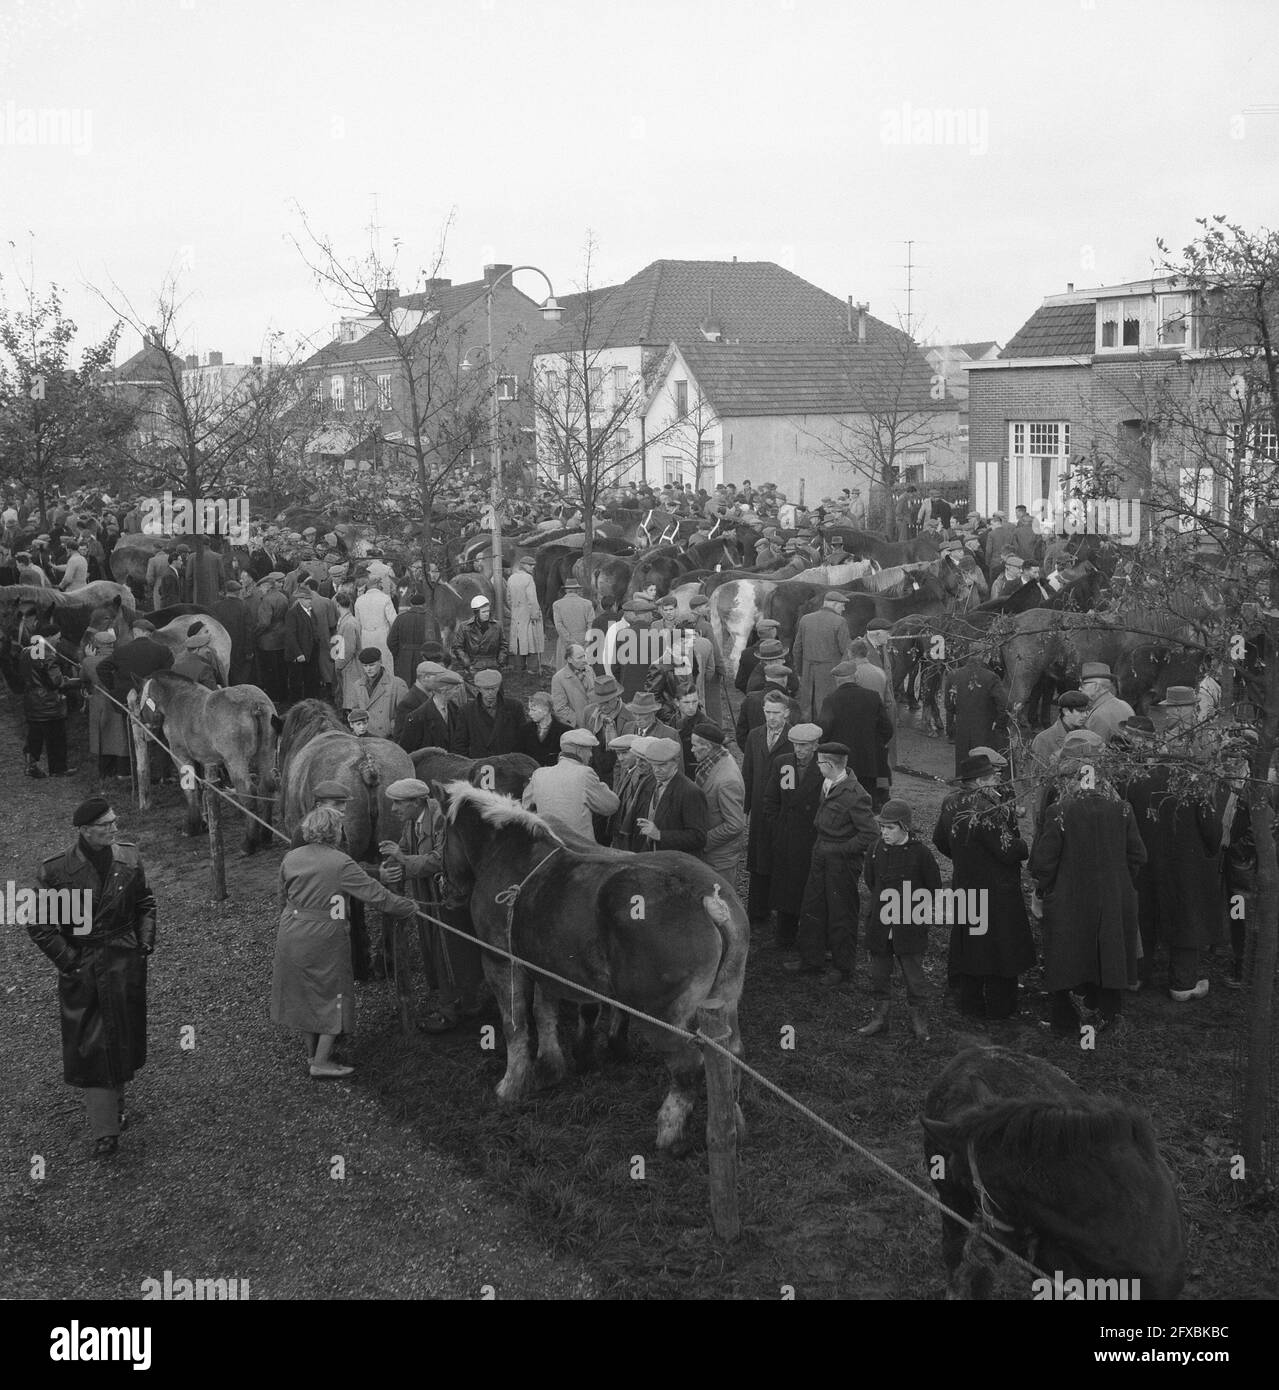 Annual horse market at Hedel, 7 November 1960, horse markets, The Netherlands, 20th century press agency photo, news to remember, documentary, historic photography 1945-1990, visual stories, human history of the Twentieth Century, capturing moments in time Stock Photo